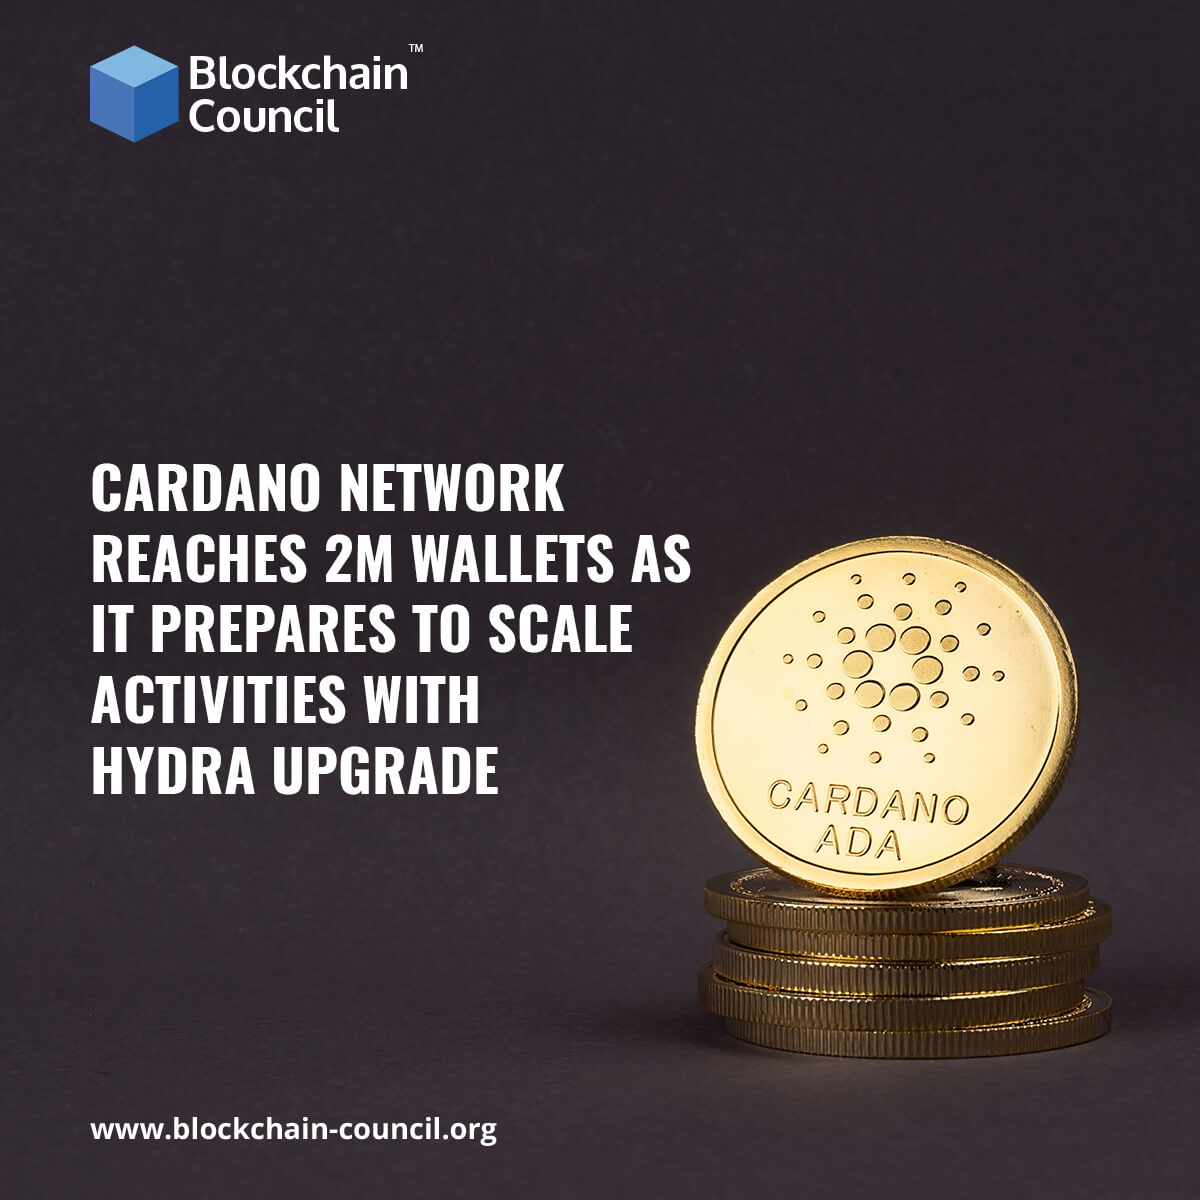 Cardano network reaches 2M wallets as it prepares to scale activities with Hydra upgrade